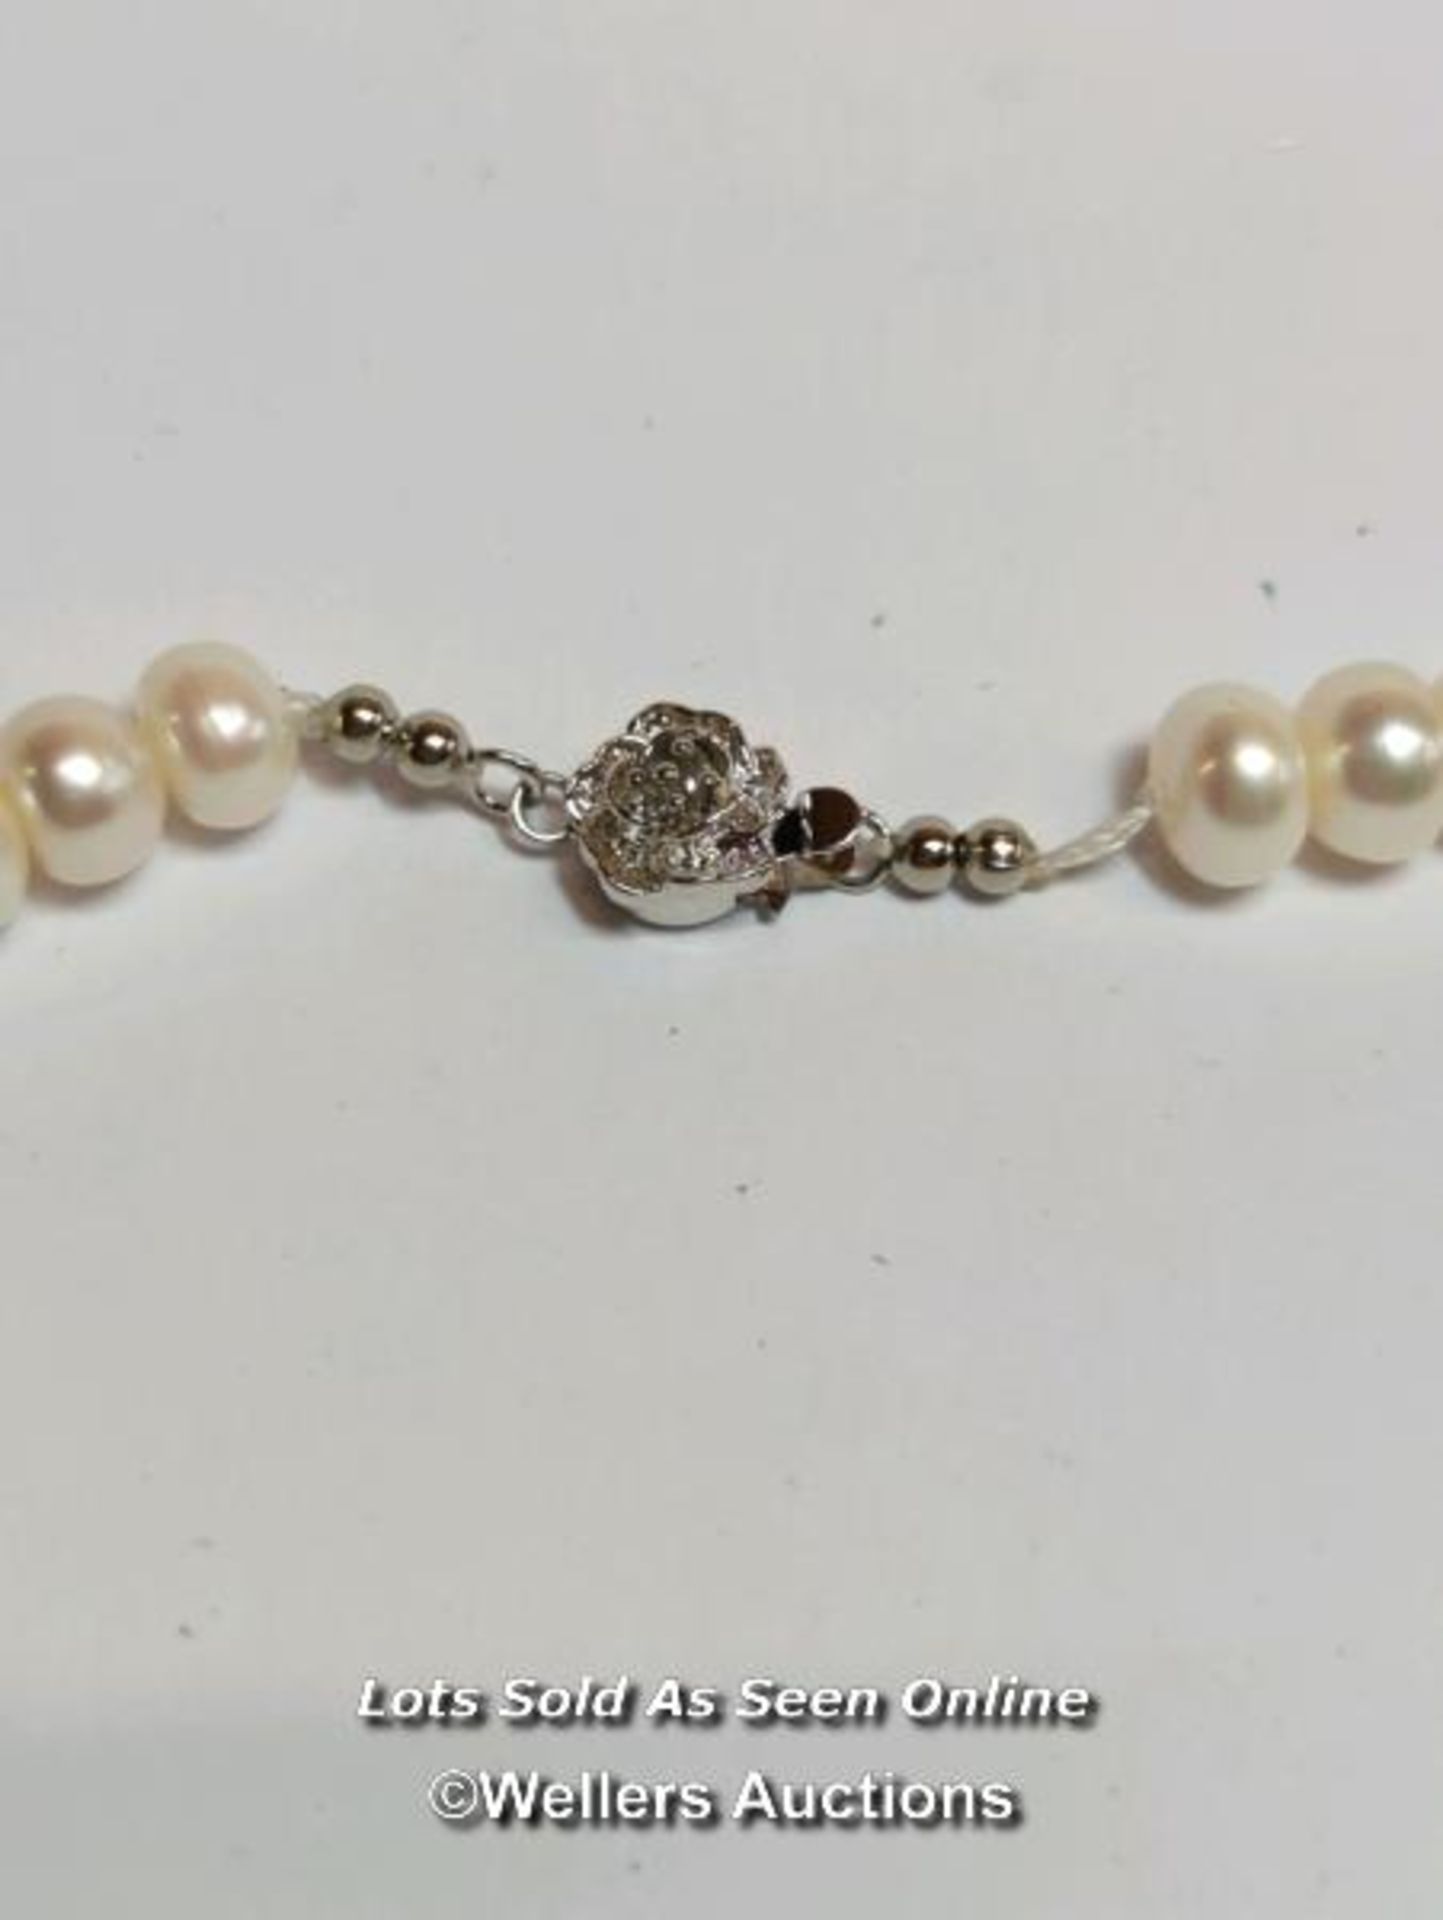 A freshwater cultured pearl necklace on base metal clasp / SF - Image 6 of 7